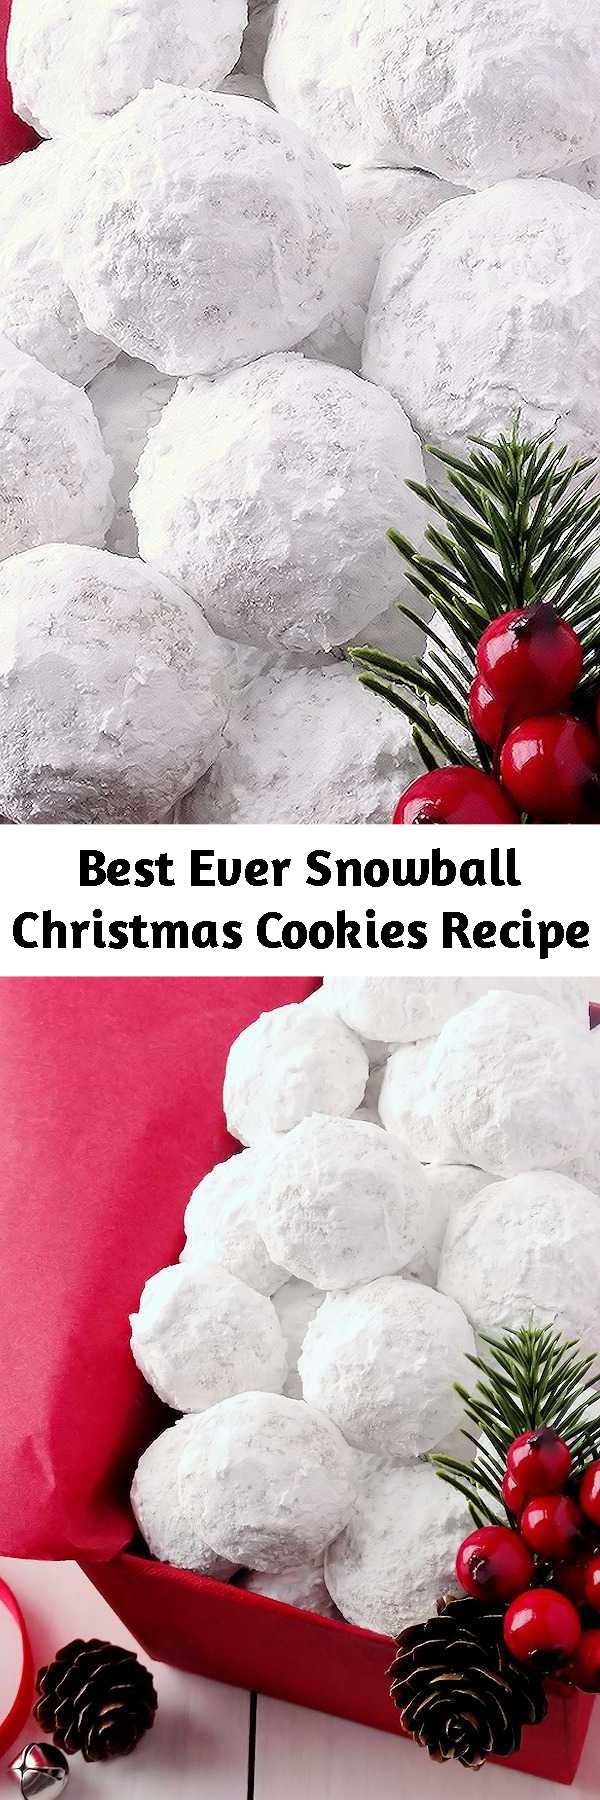 Best Ever Snowball Christmas Cookies Recipe - Simply the best! Buttery, never dry, with plenty of walnuts for a scrumptious melt-in-your-mouth shortbread cookie (also known as Russian Teacakes or Mexican Wedding Cookies). Everyone will LOVE these classic Christmas cookies!